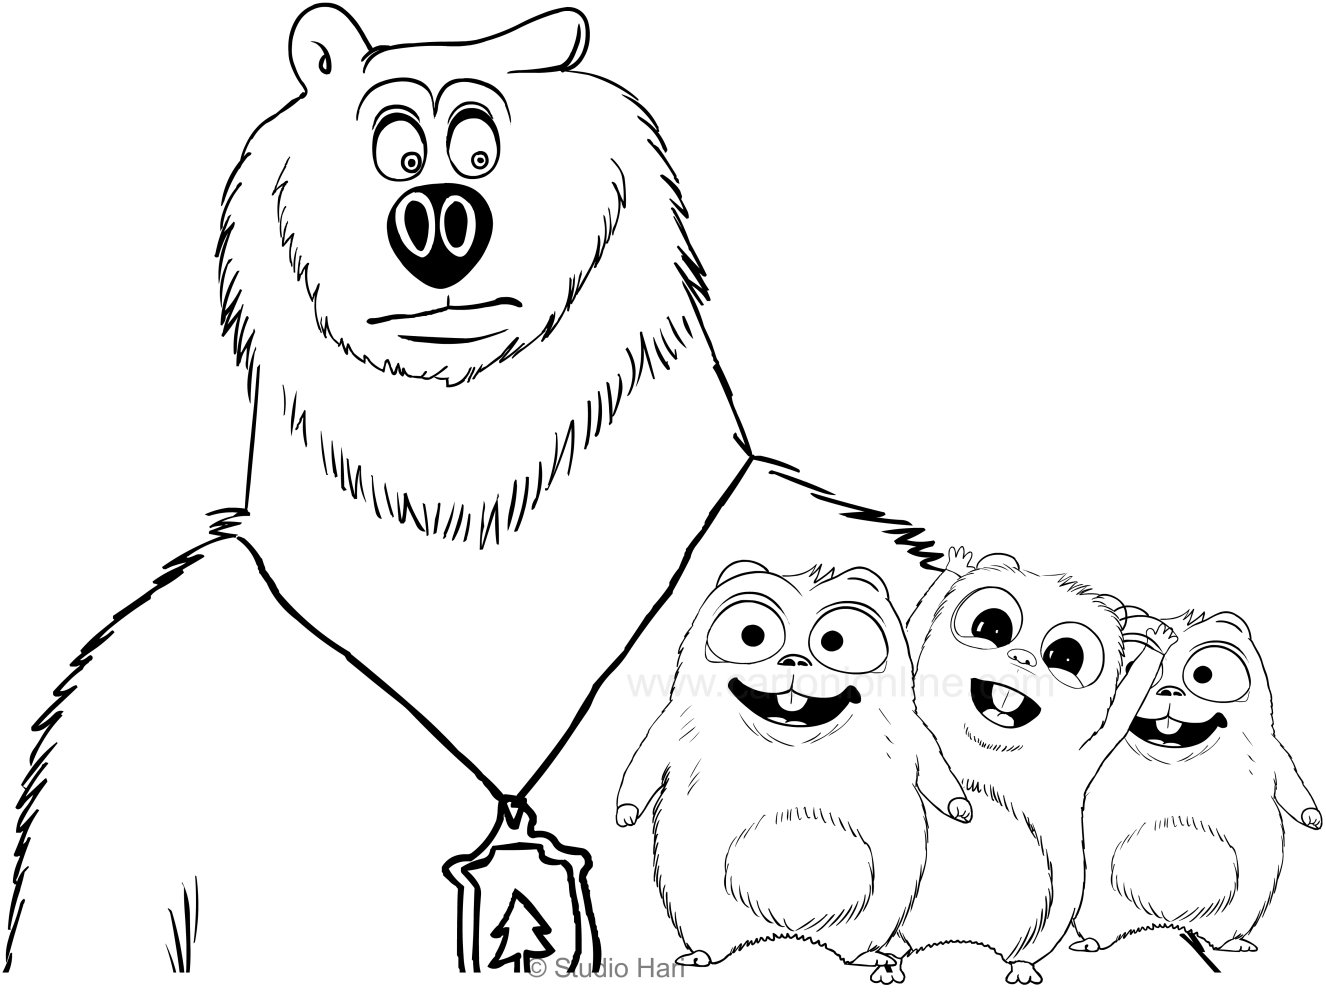 Grizzy and the Lemming coloring page to print